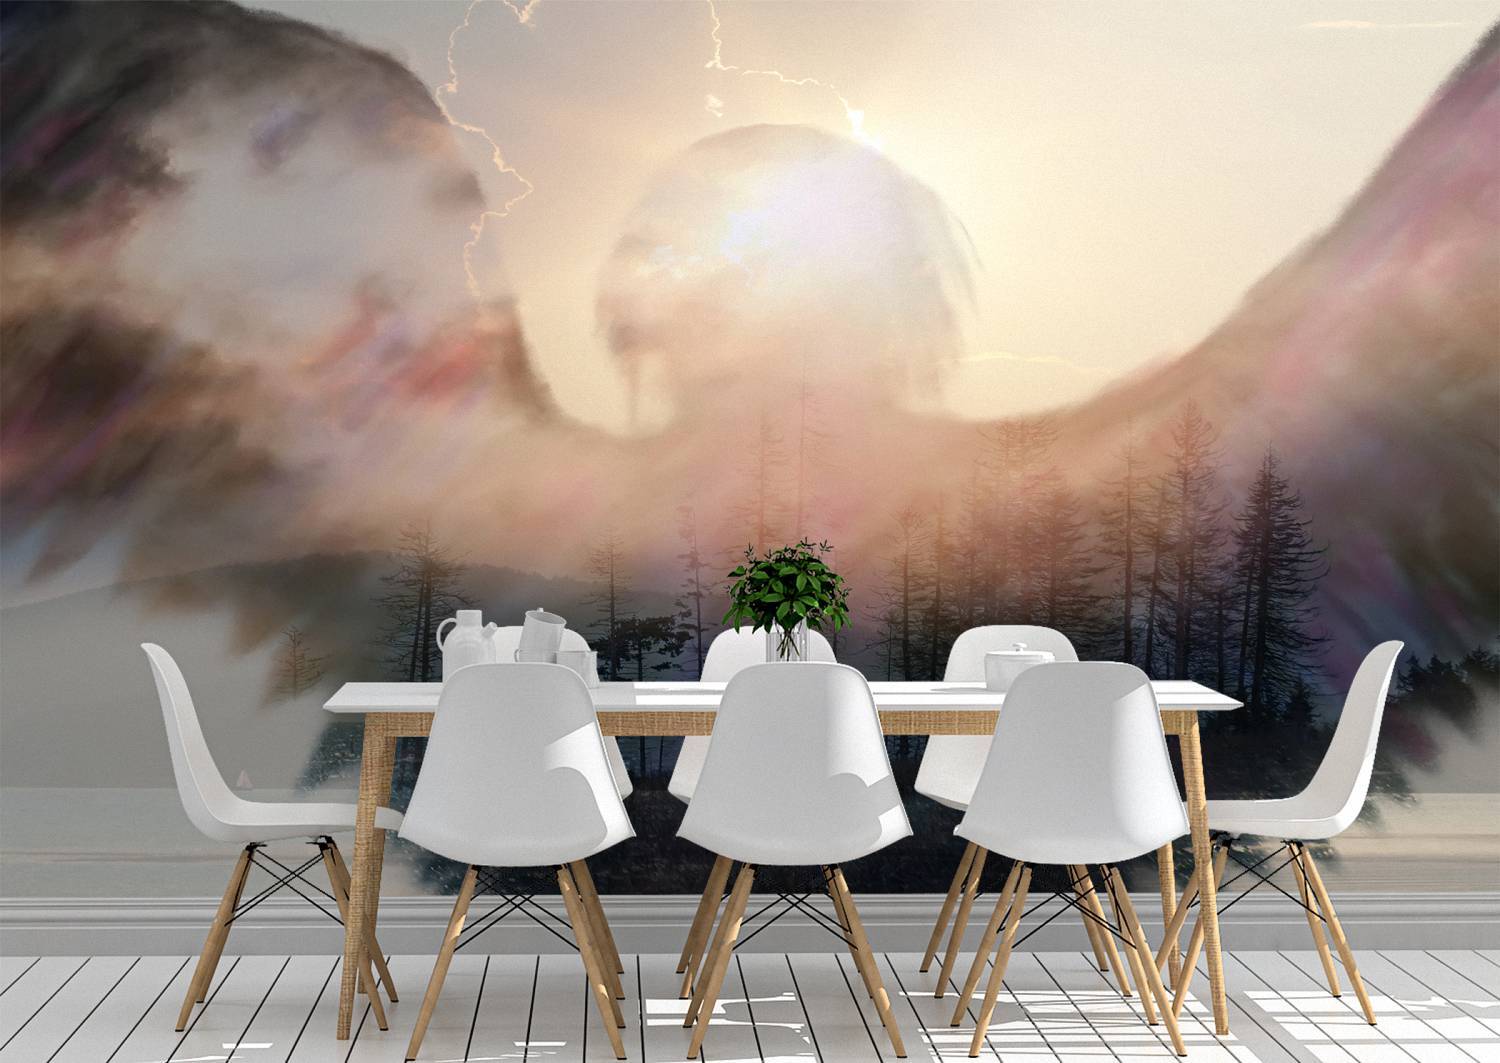 Angel Shadow over the Forest Wall Mural Photo Wallpaper UV Print Decal Art Décor